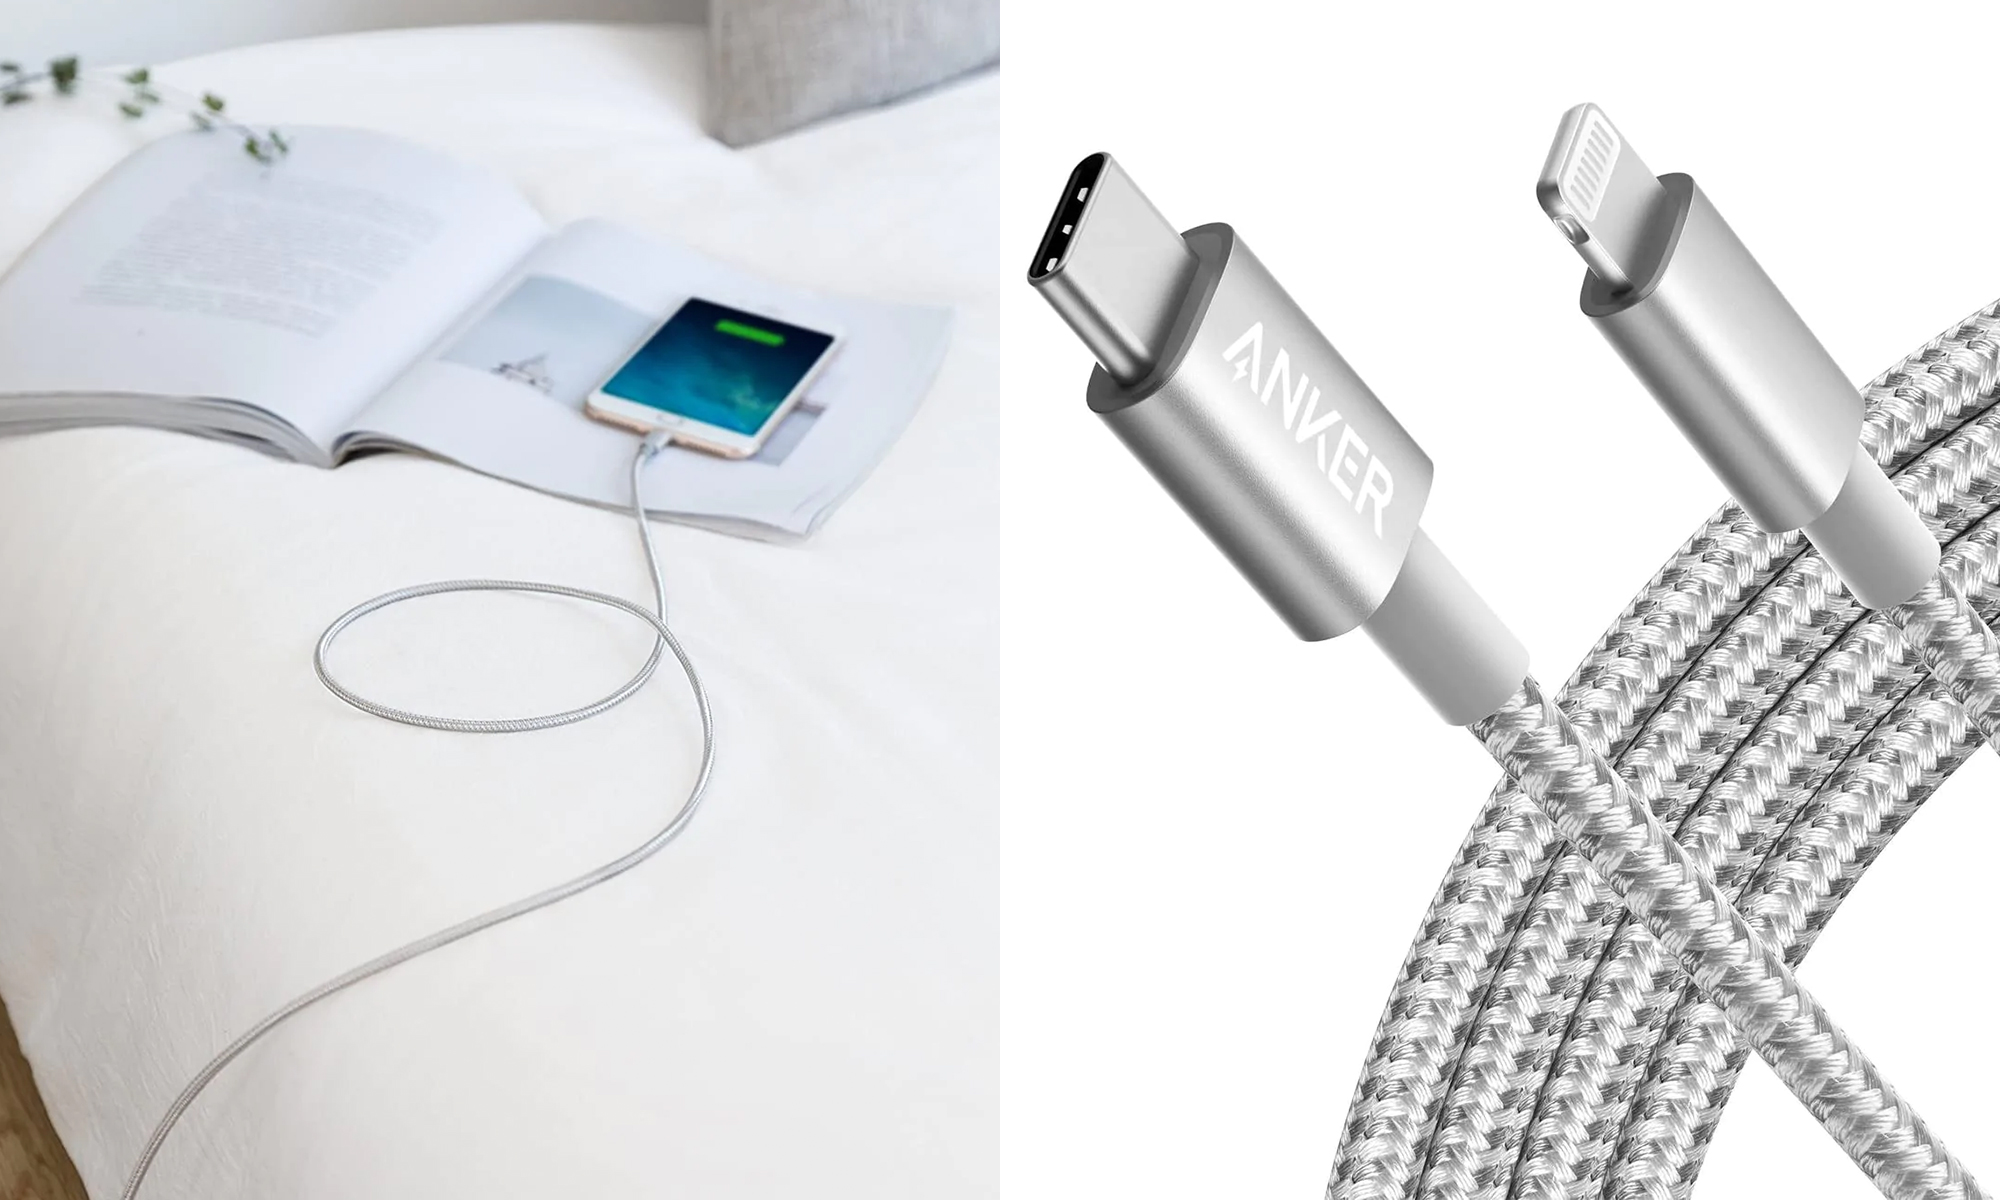 Anker Powerline cables